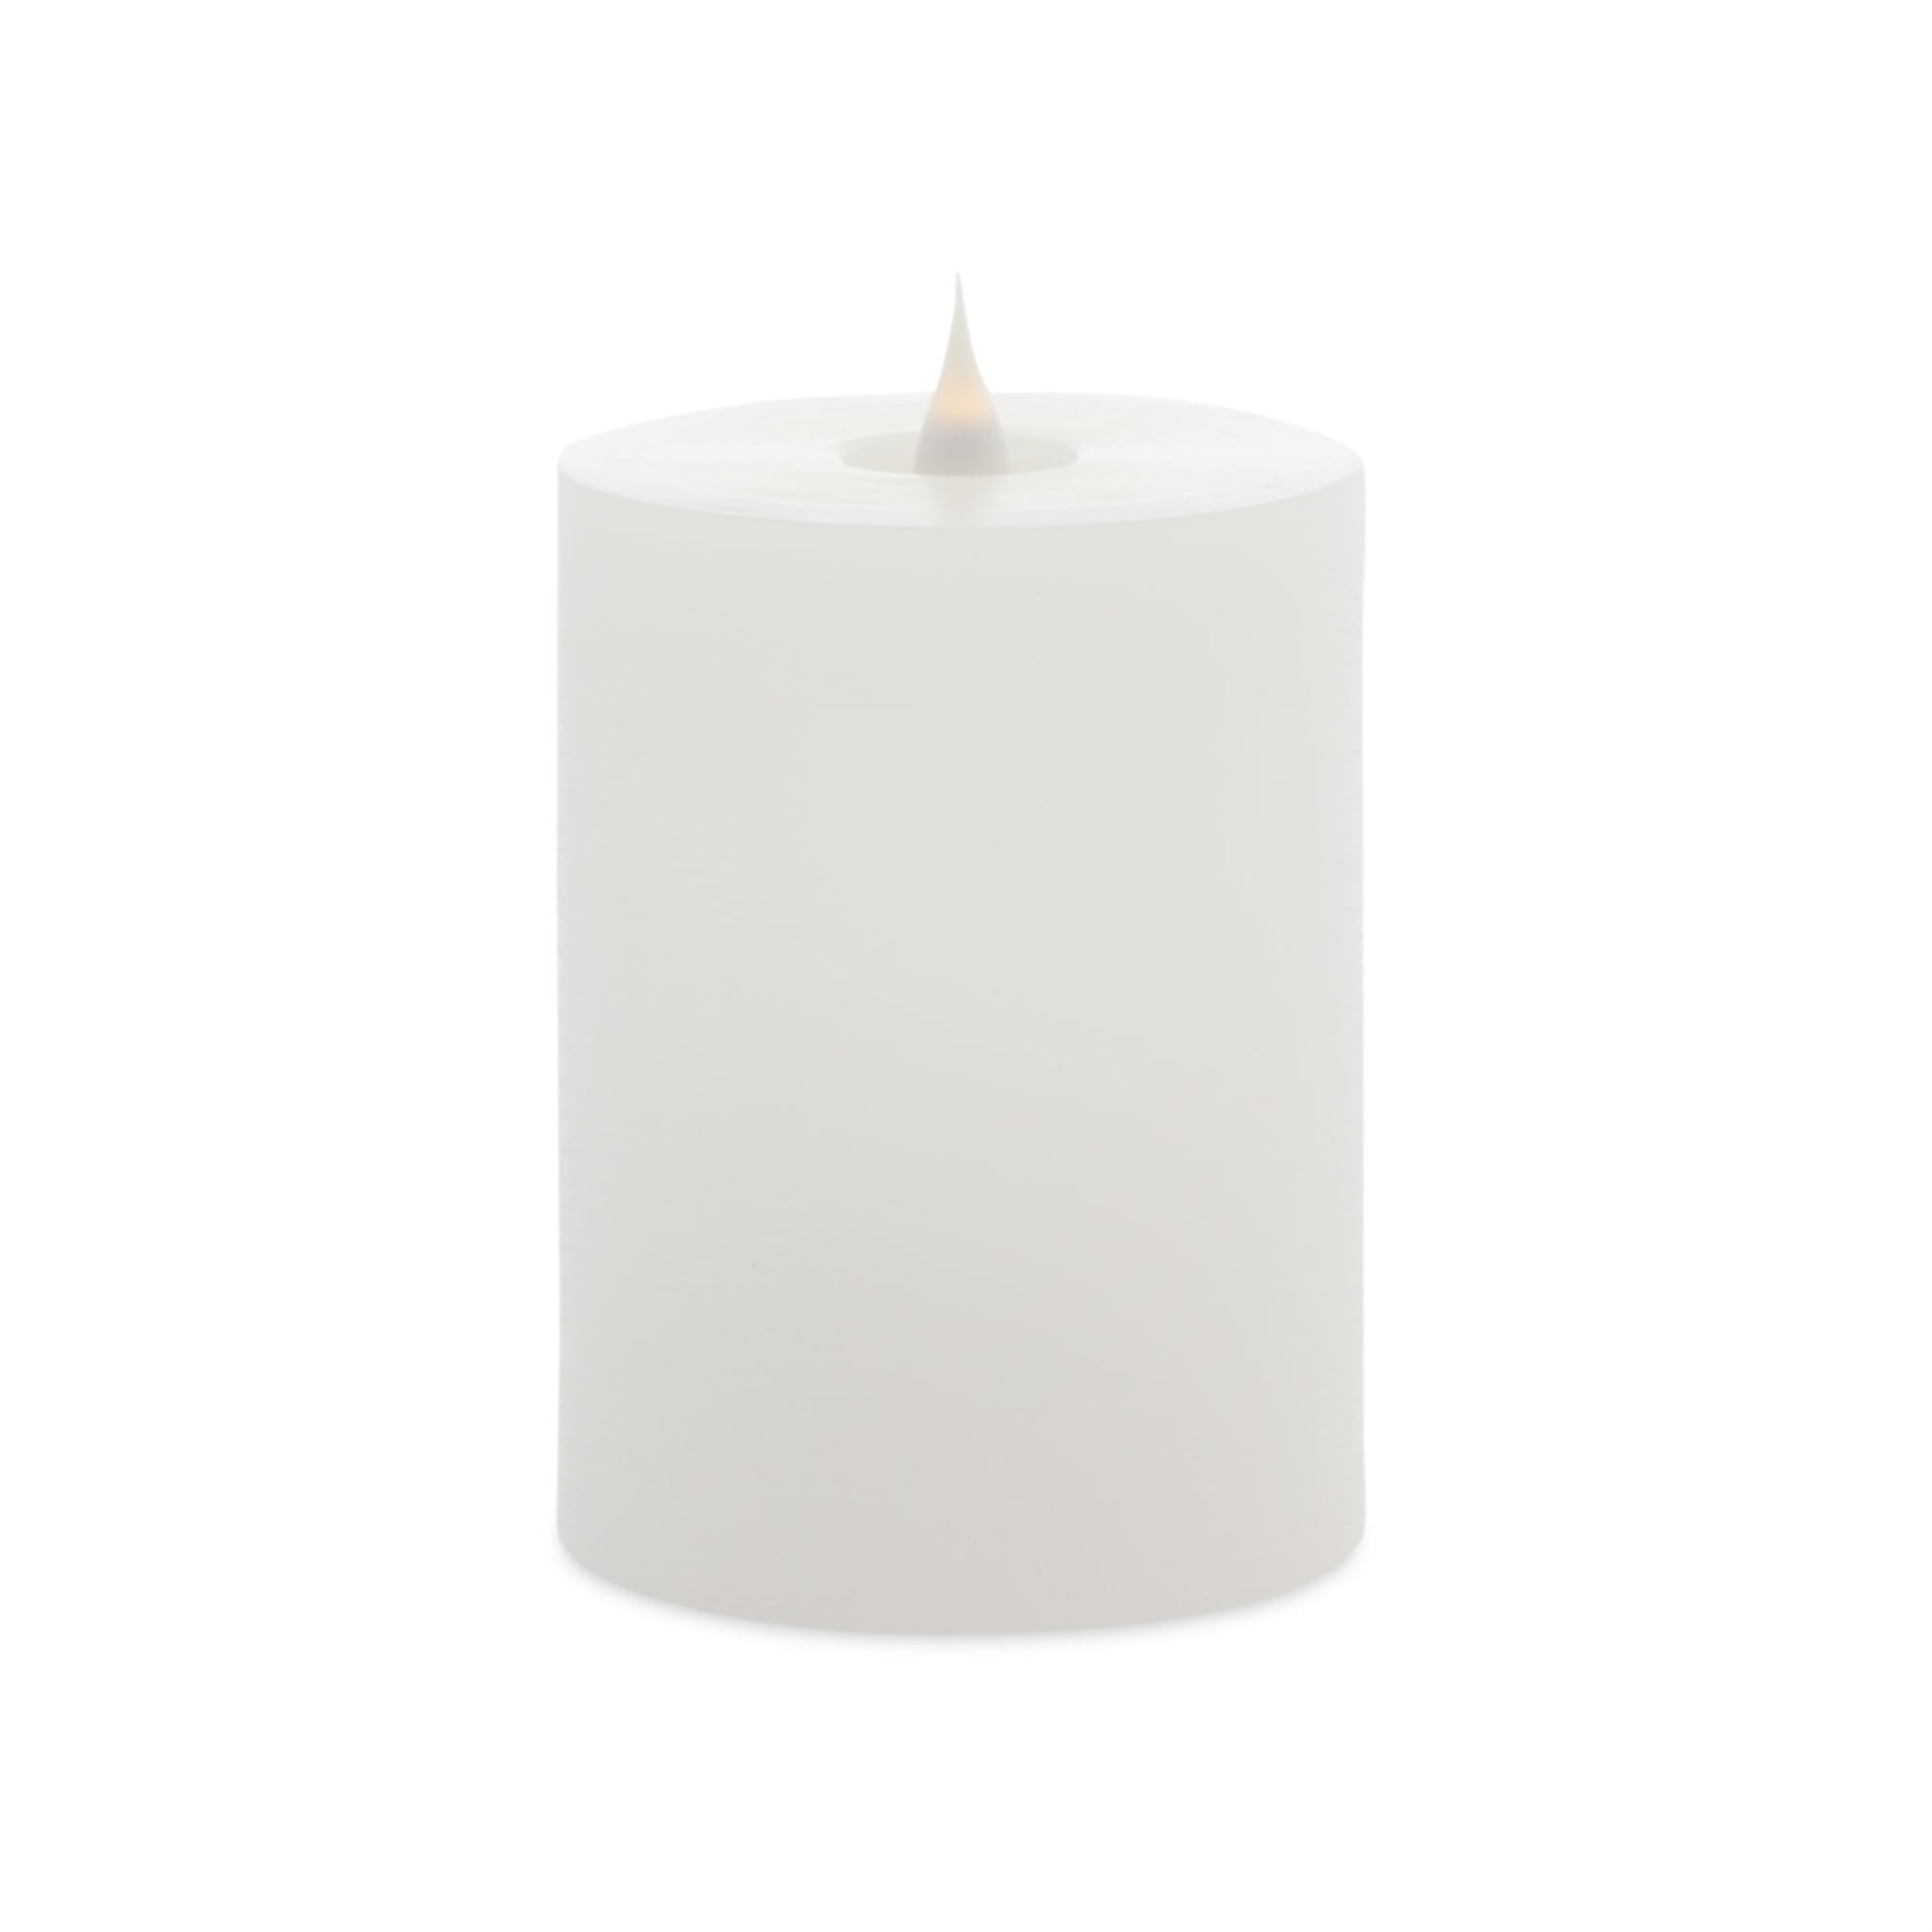 Candle 3"D x 5"H Wax/Plastic